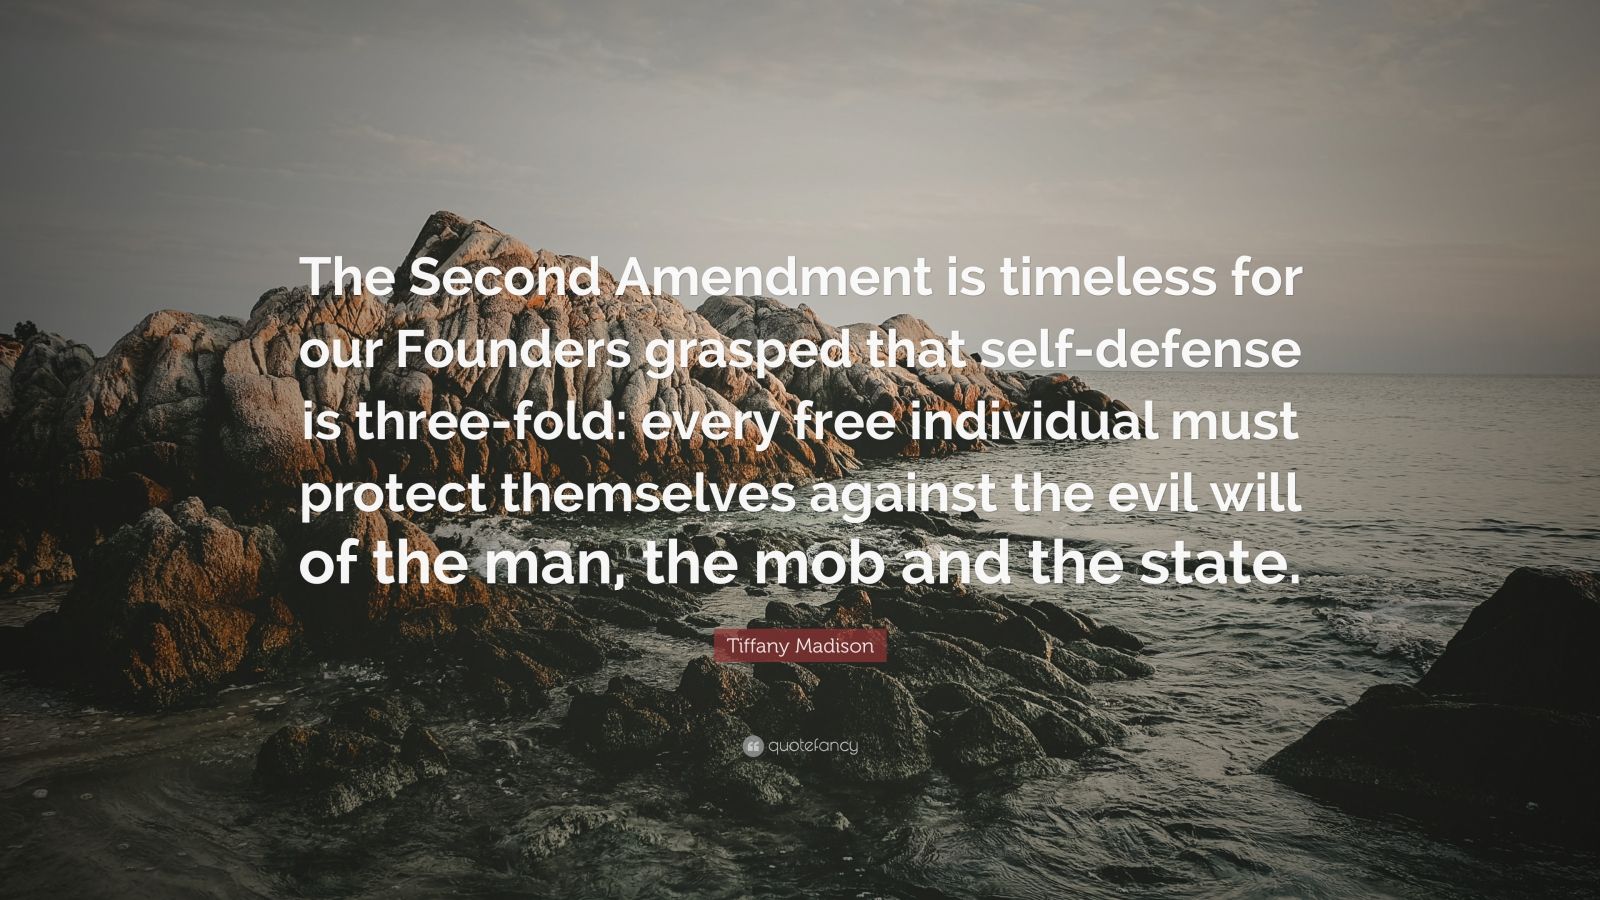 Tiffany Madison Quote: “The Second Amendment is timeless for our